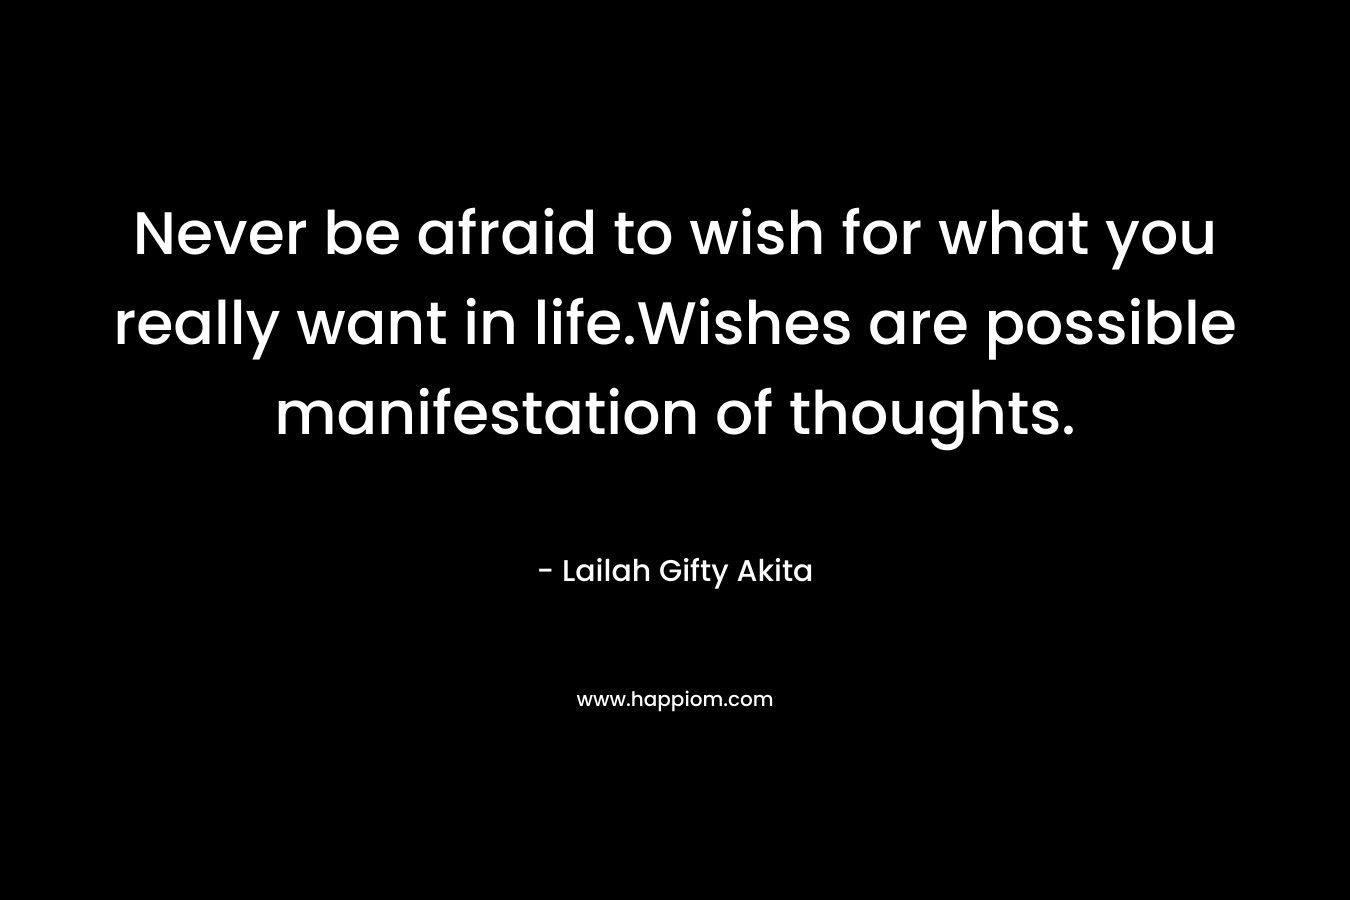 Never be afraid to wish for what you really want in life.Wishes are possible manifestation of thoughts. – Lailah Gifty Akita